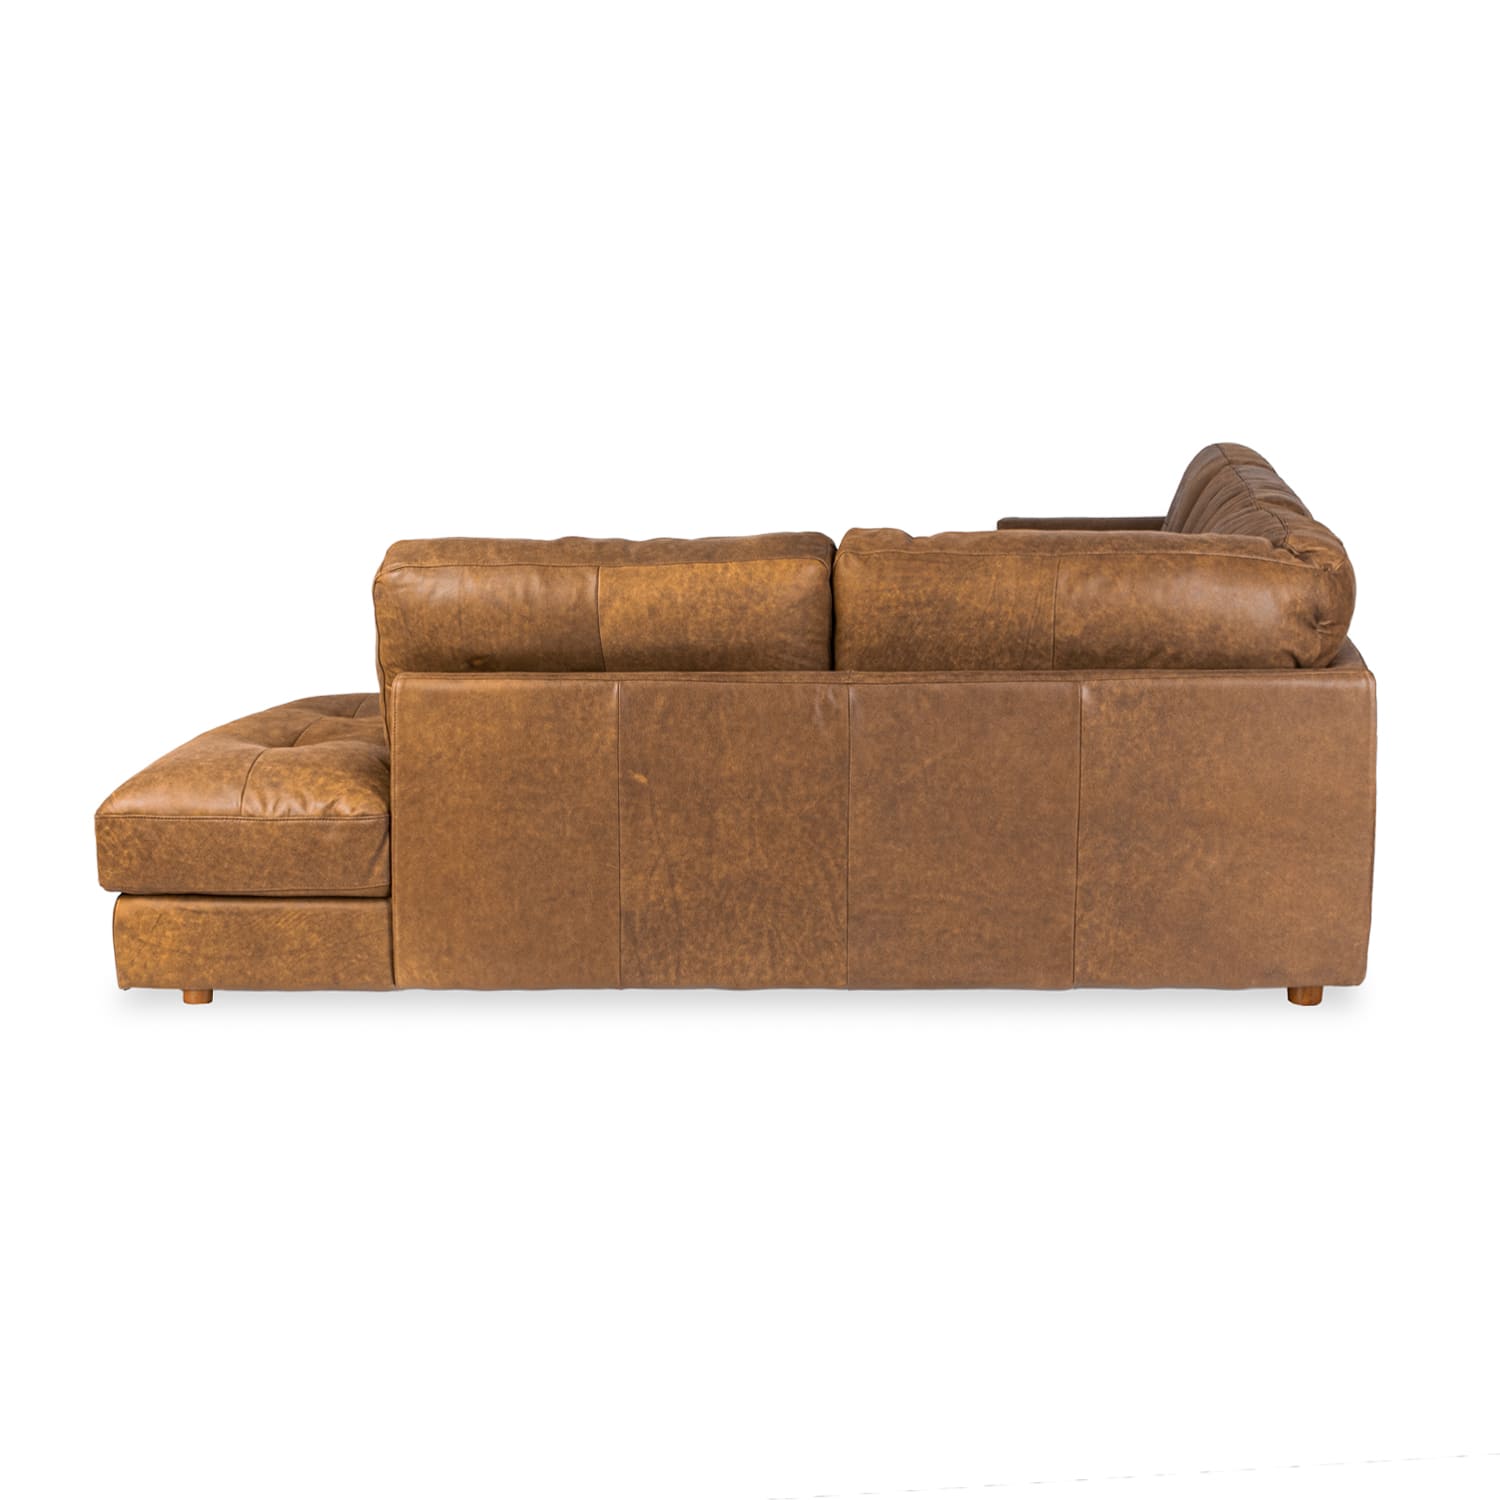 Harmony Leather Right Side Facing Chaise Lounge